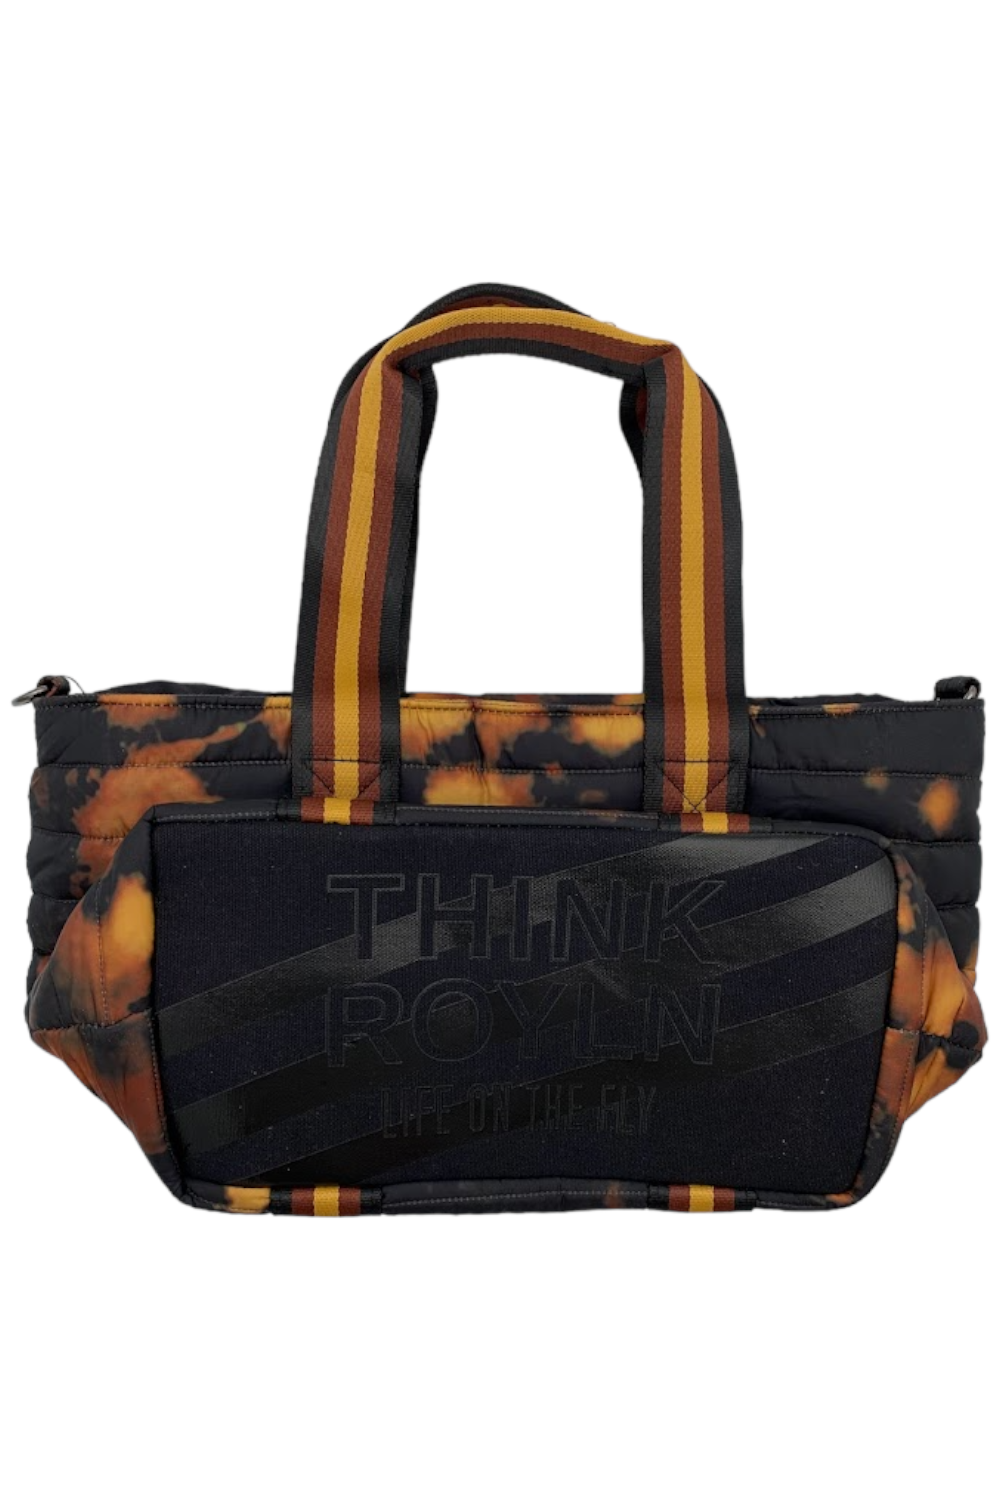 Think Royln Jr. Wingman Bag With Elevated Pockets - 7 SOUTH